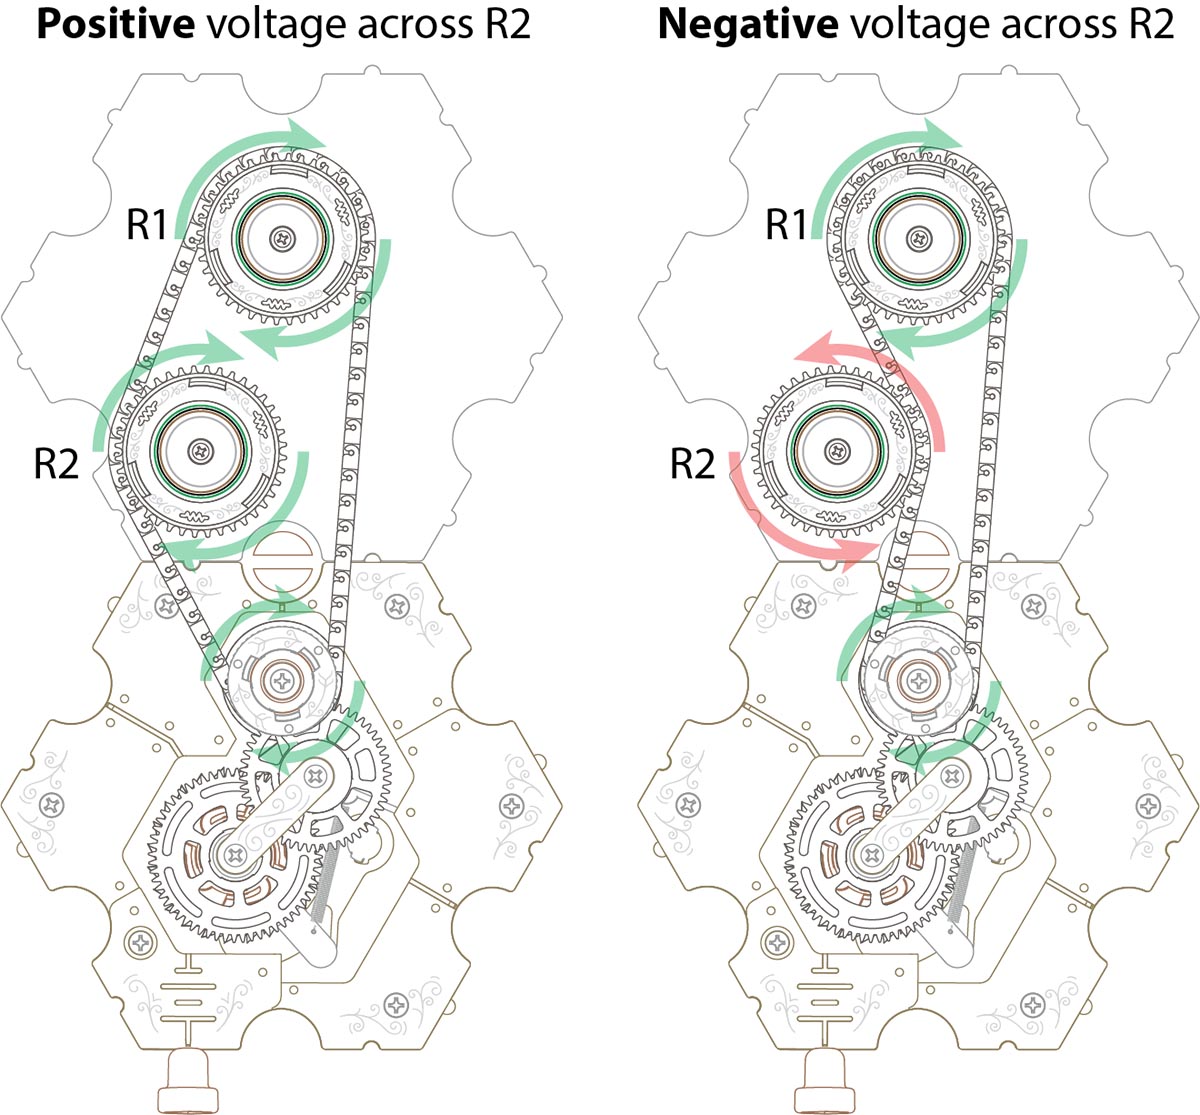 Spintronic circuits showing positive and negative voltages, and how to convert between them